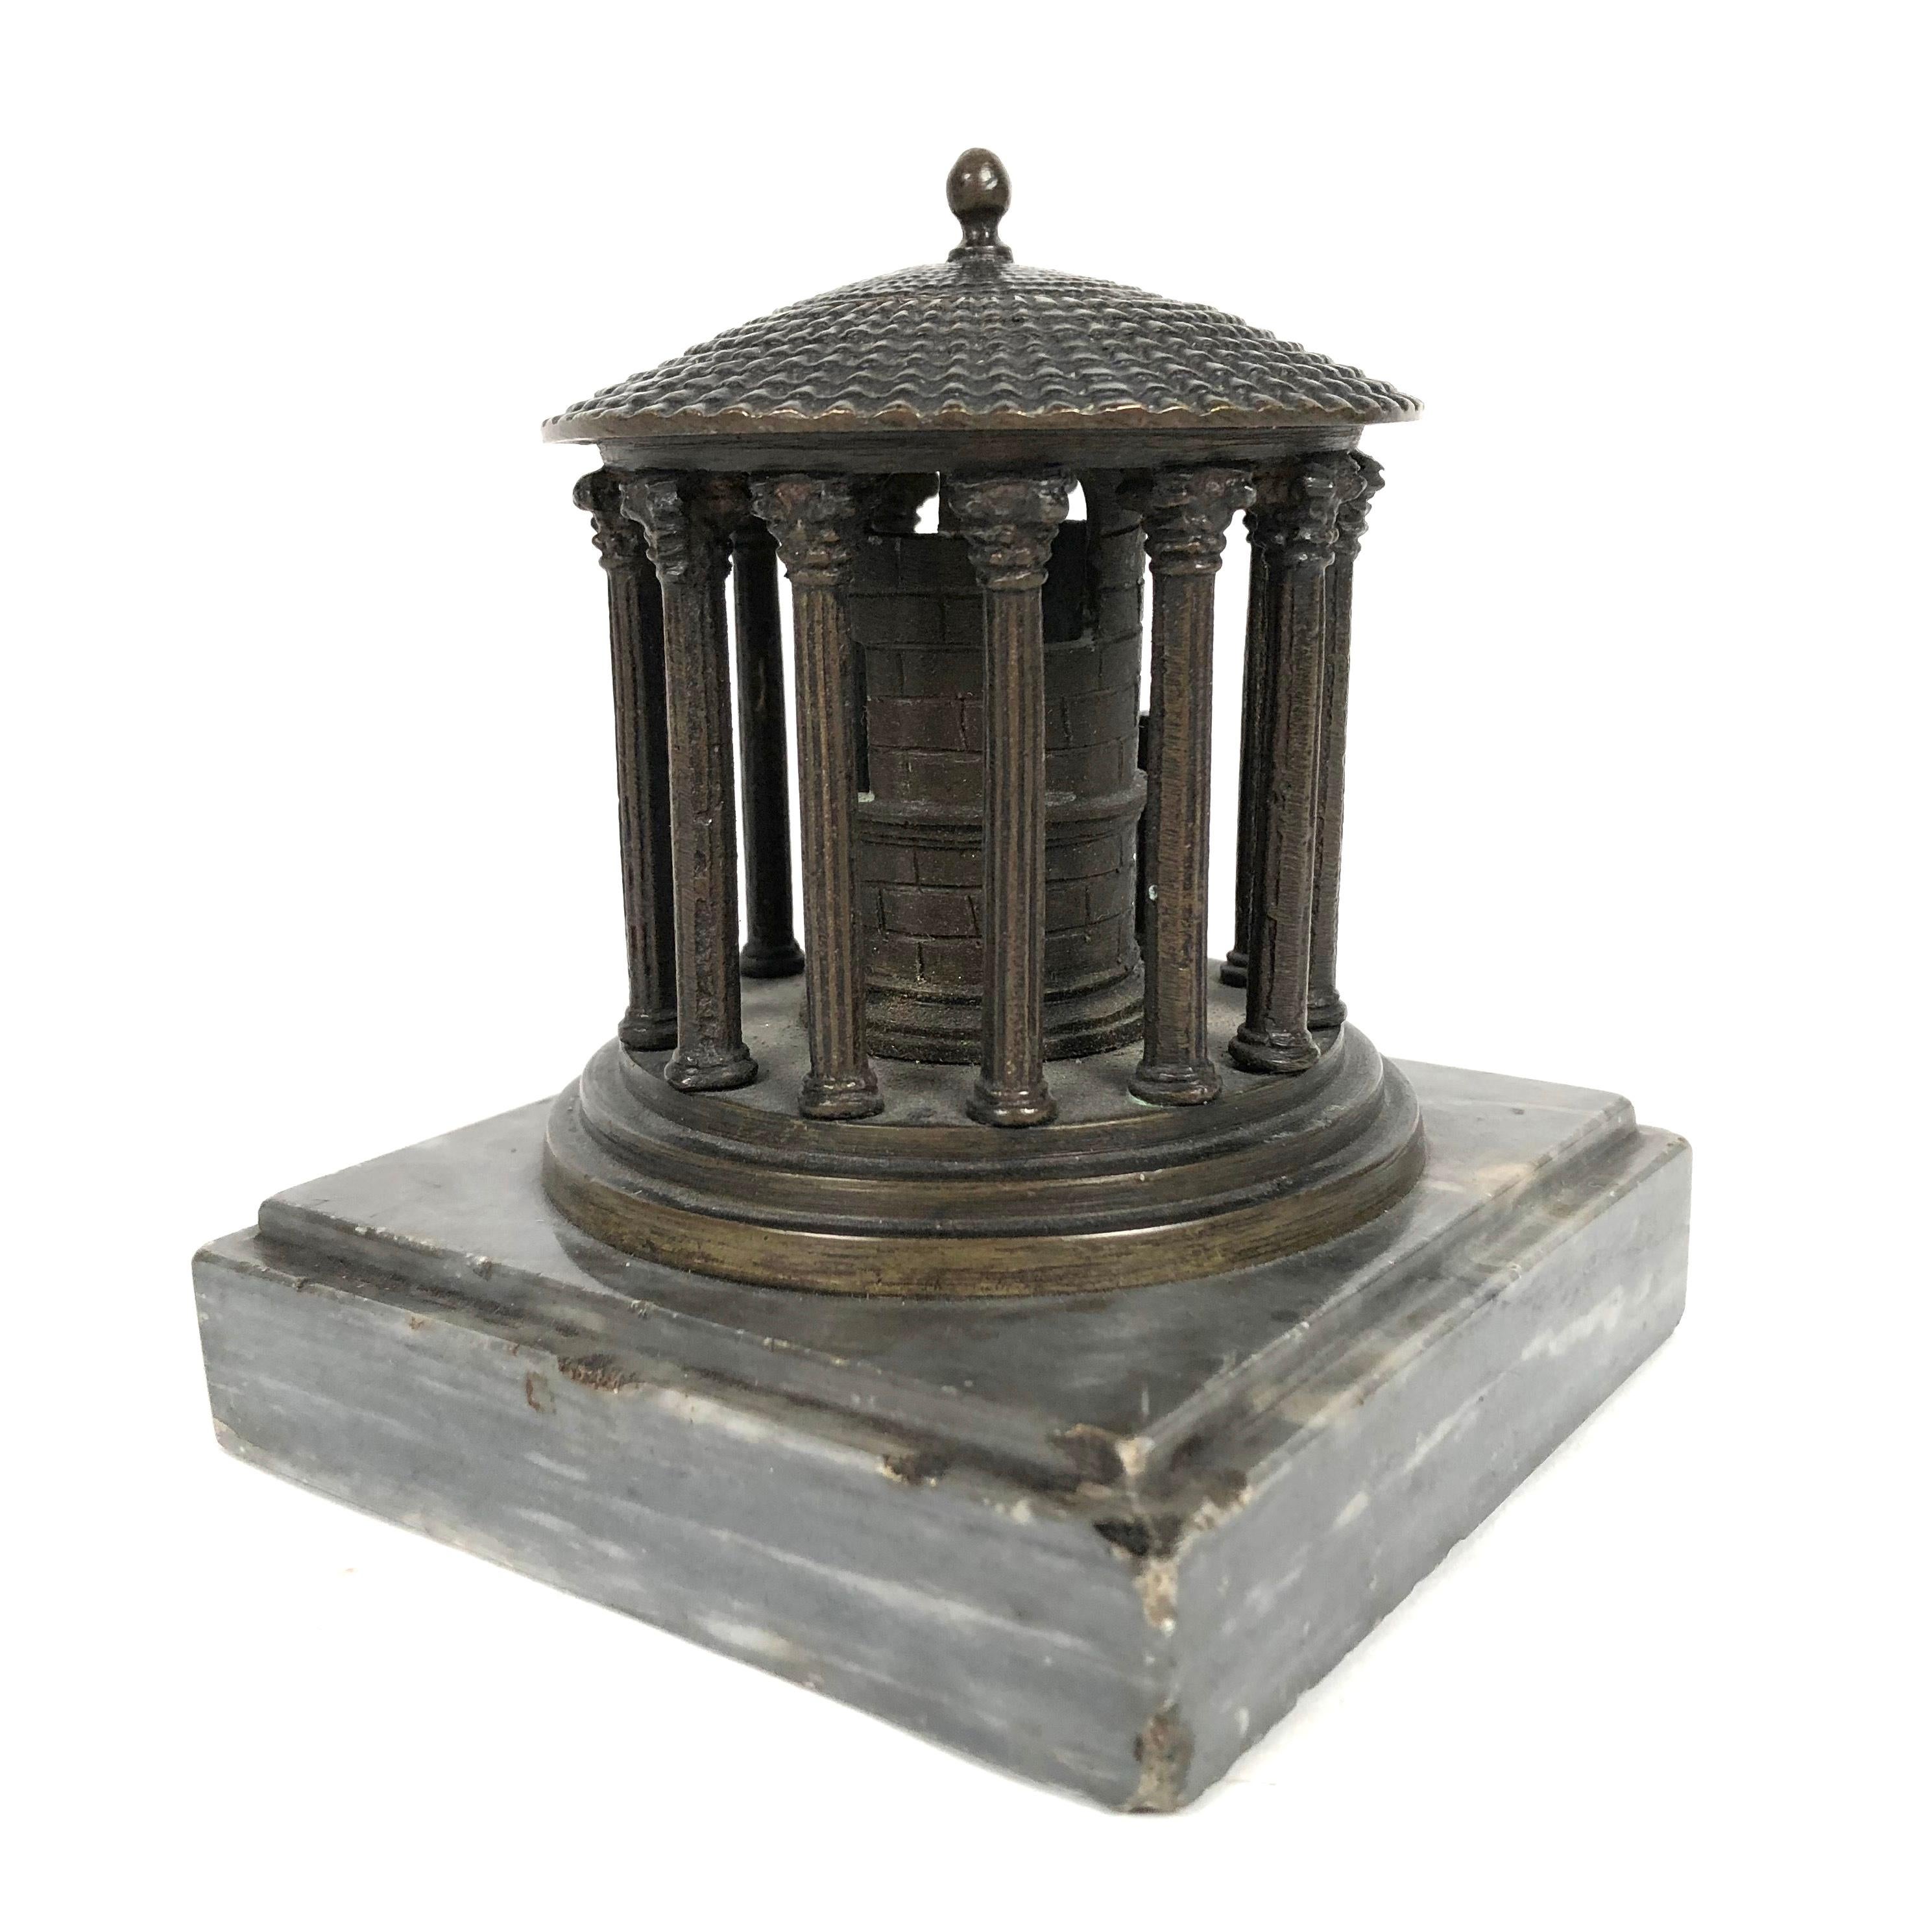 A 19th century Grand Tour neoclassical  bronze architectural model of the Temple of Vesta, Rome, circa 1875, on a square grey marble base. The primary value in going on the Grand Tour was the exposure it provided to the cultural legacy of classical